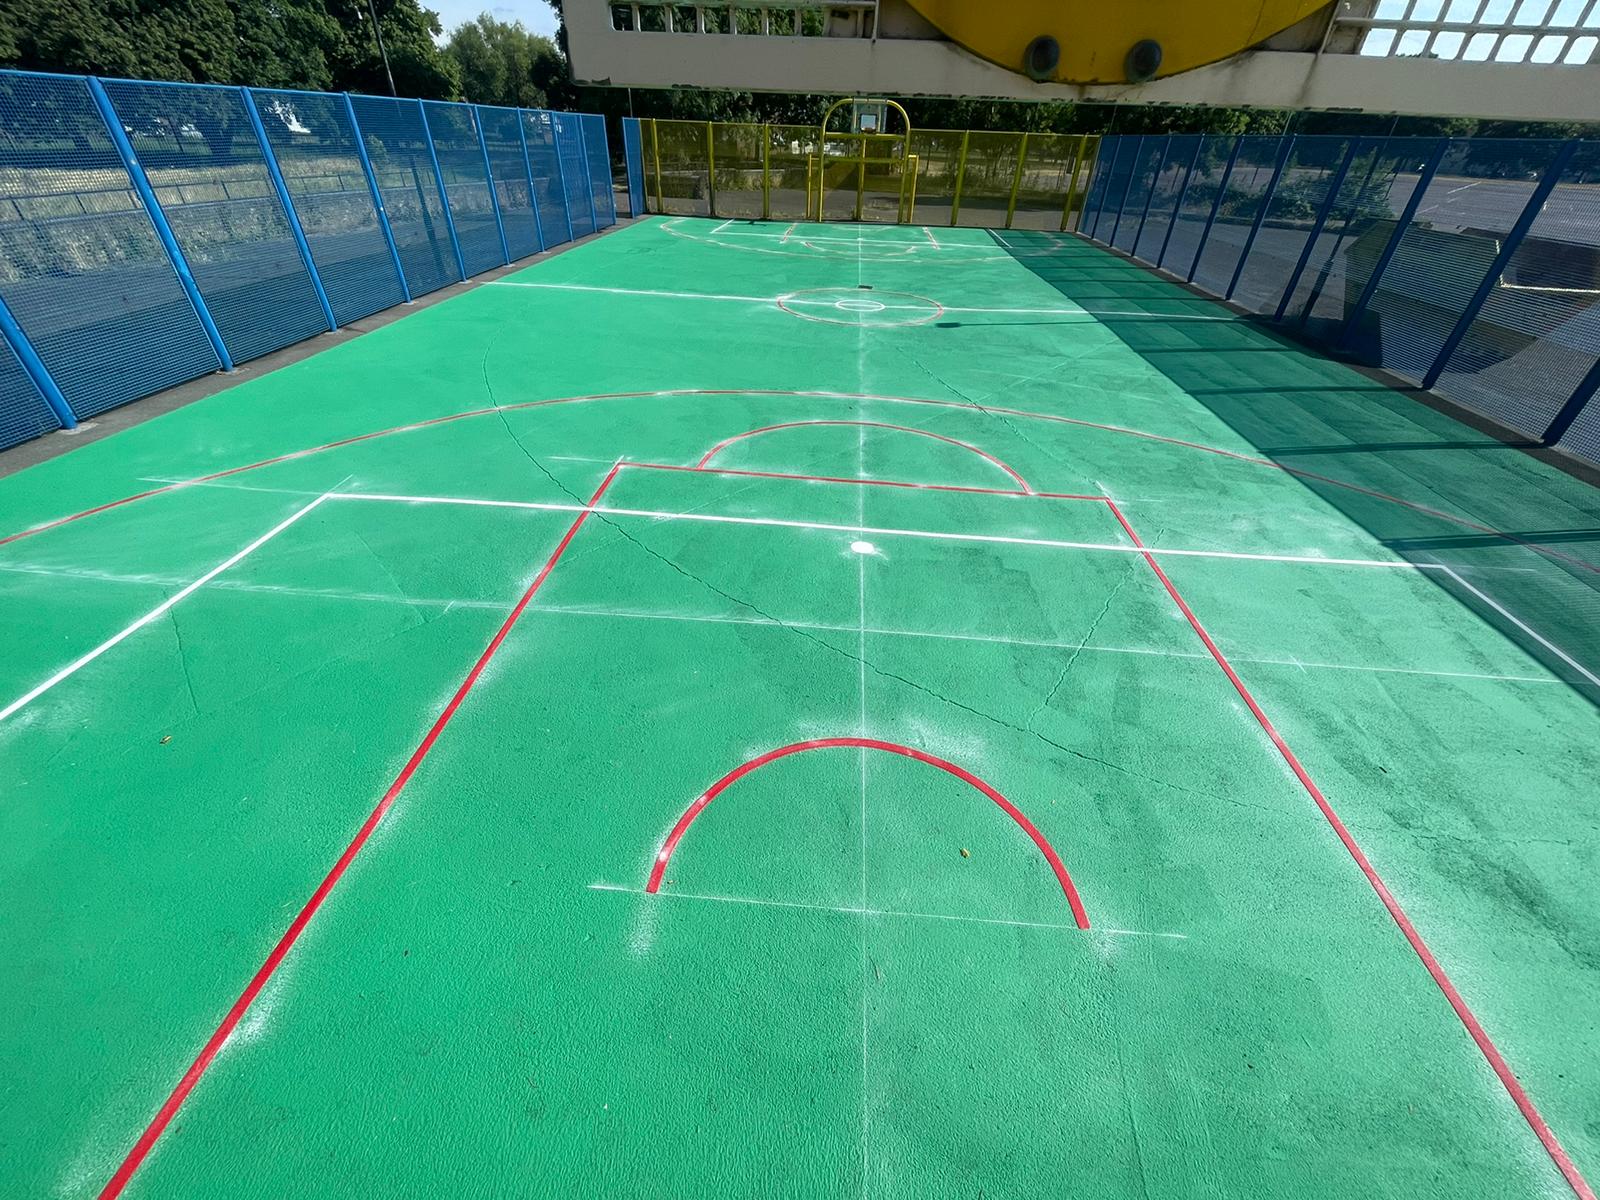 Creating a Multi-Use Games Area (MUGA) with Thermoplastic Playground Markings